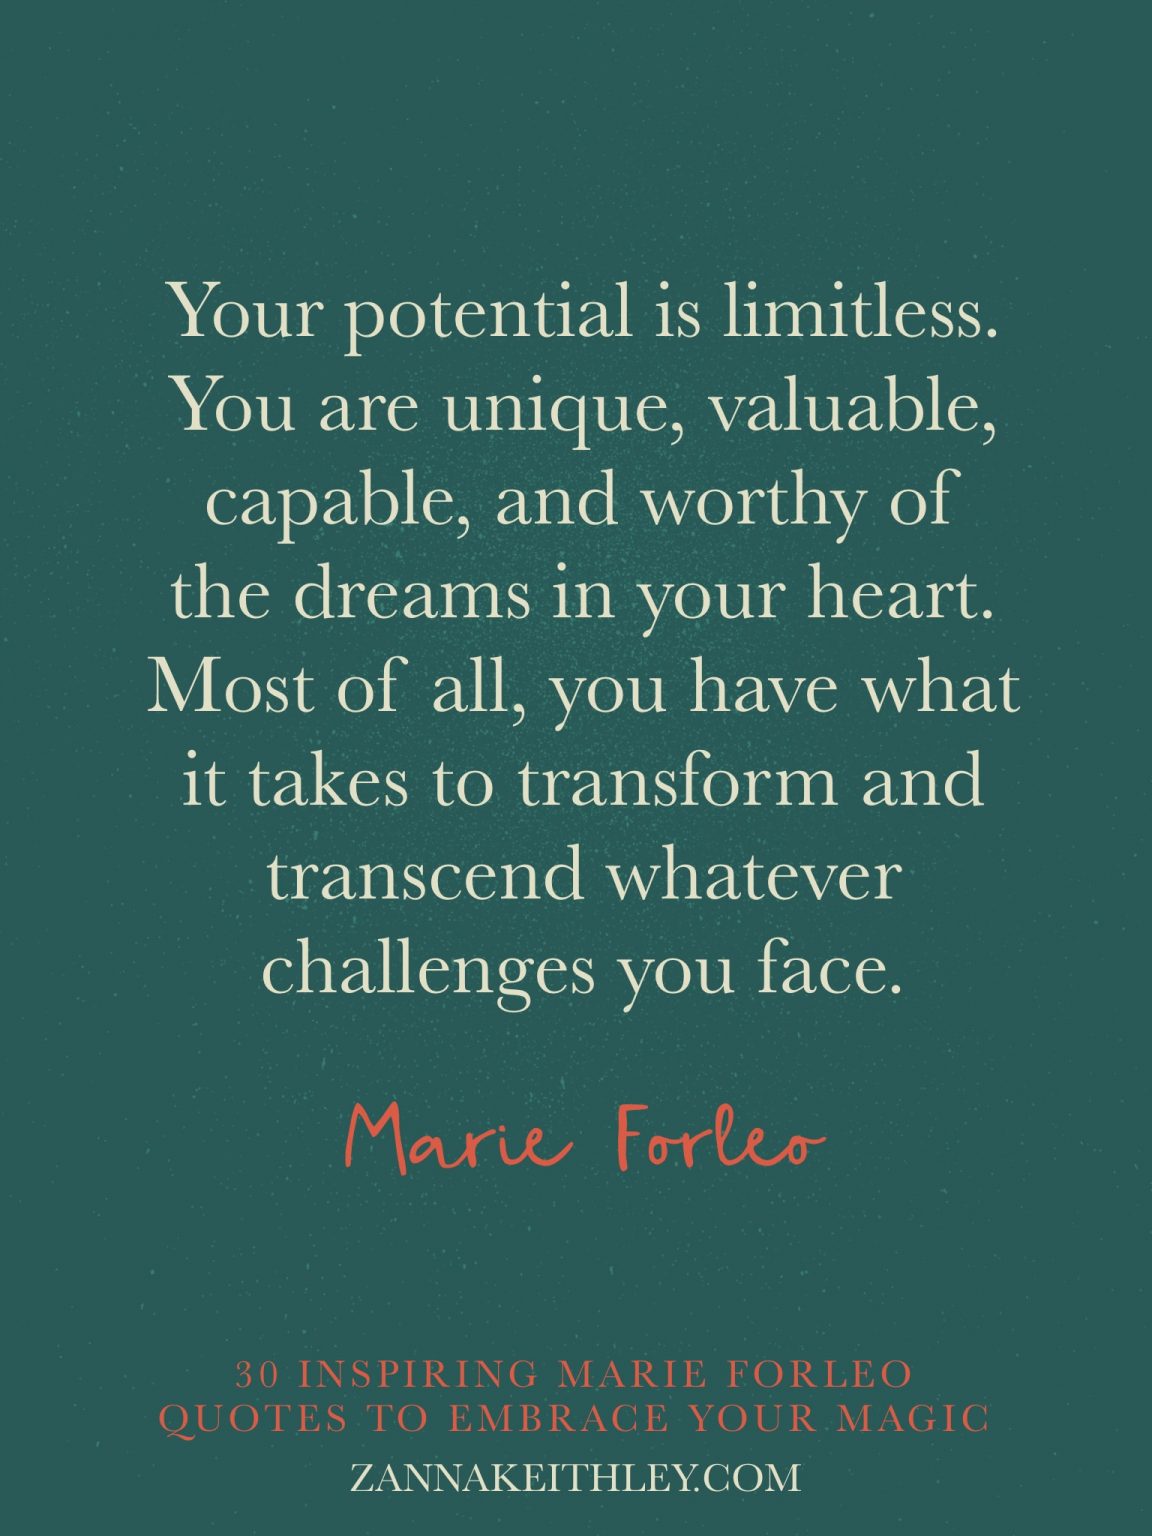 30 Inspiring Marie Forleo Quotes to Embrace Your Magic - Zanna Keithley